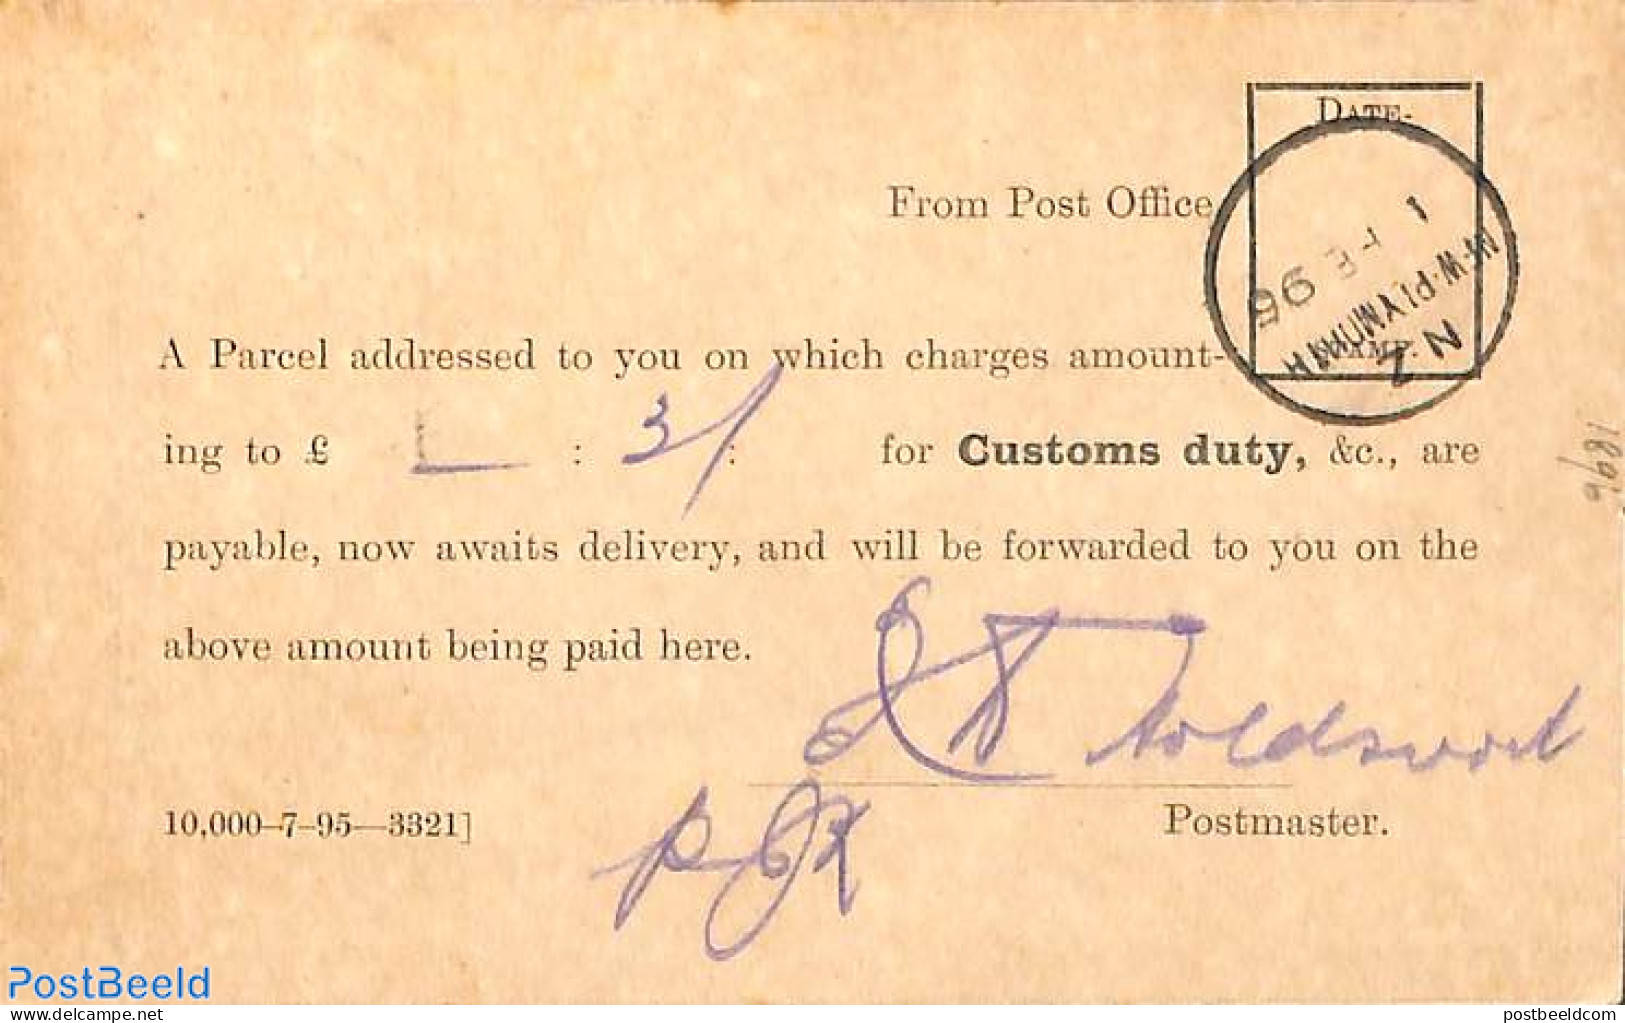 New Zealand 1896 Colonial And Foreign Parcel Post From New Plymouth Post Office, Postal History - Cartas & Documentos